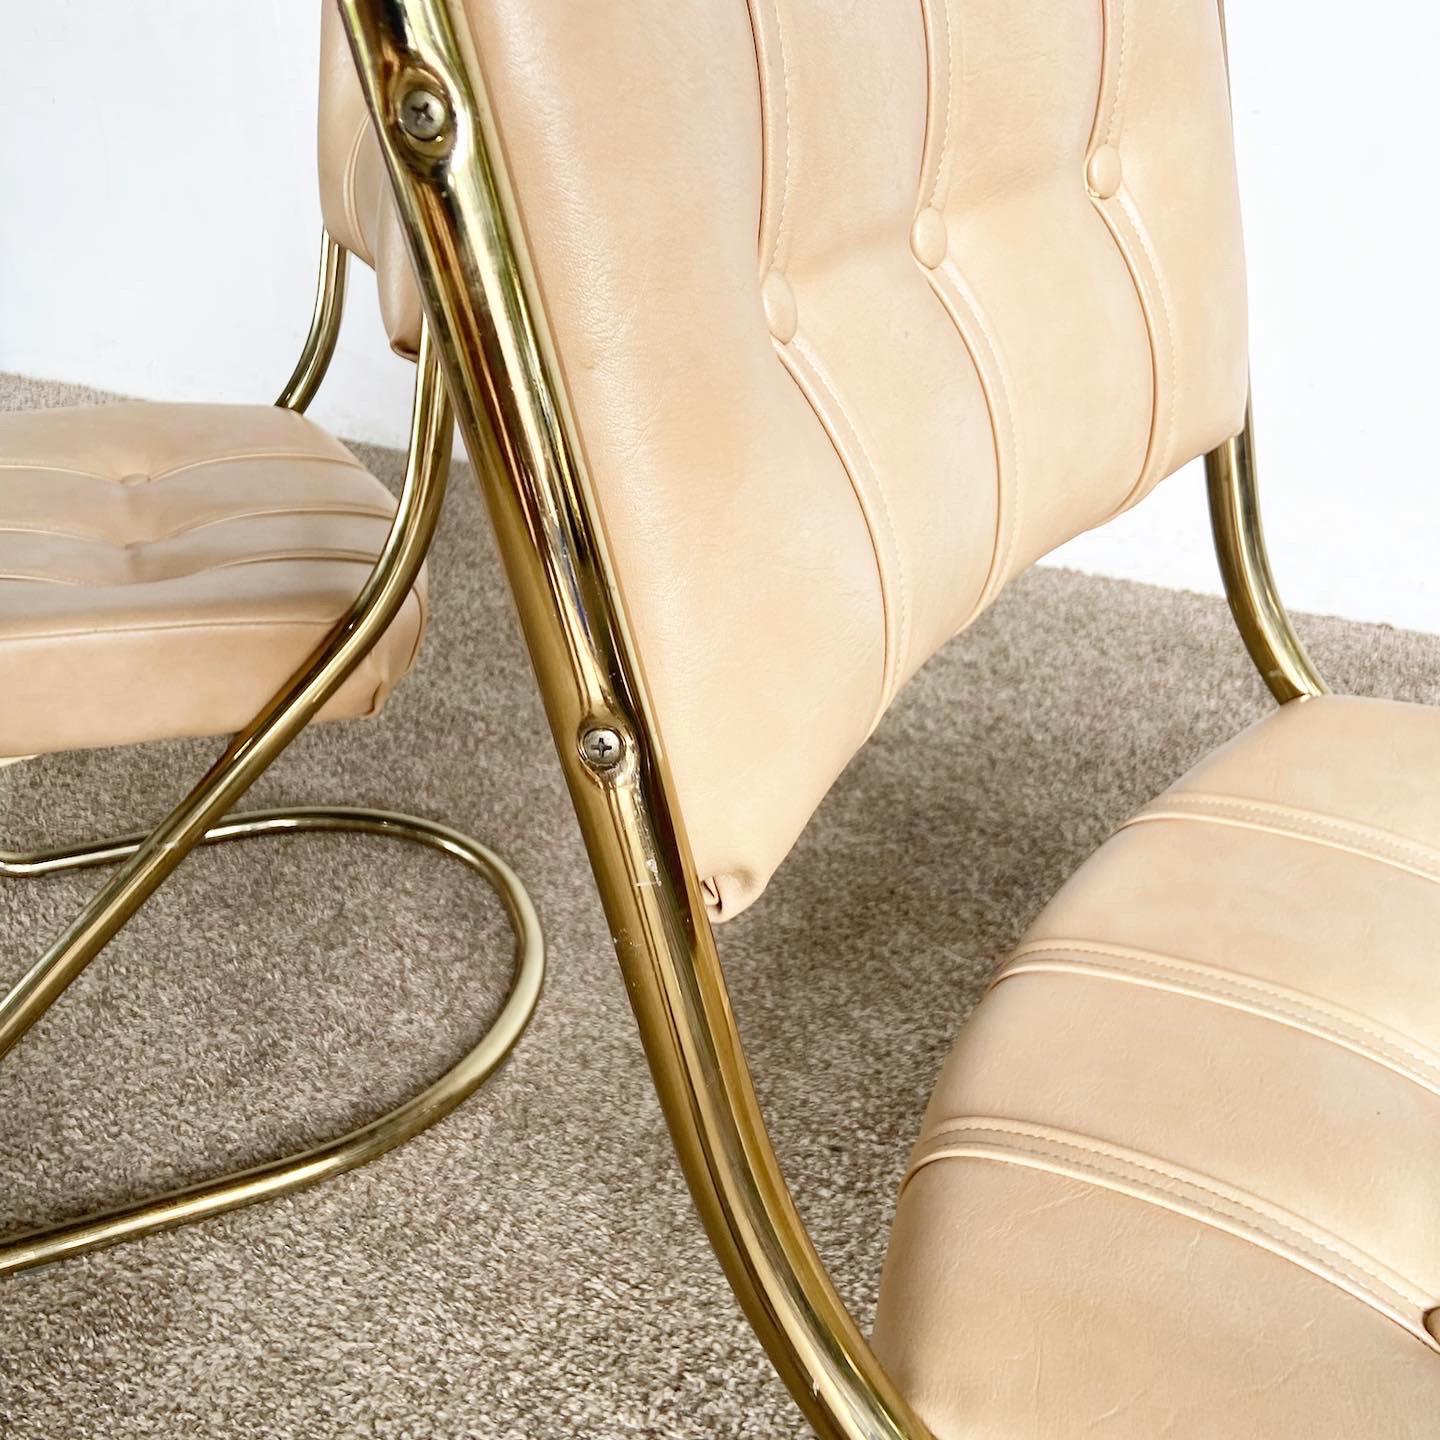 Mid Century Modern Gold and Tan Tufted Cantilever Chairs by Chromcraft - a Pair For Sale 2